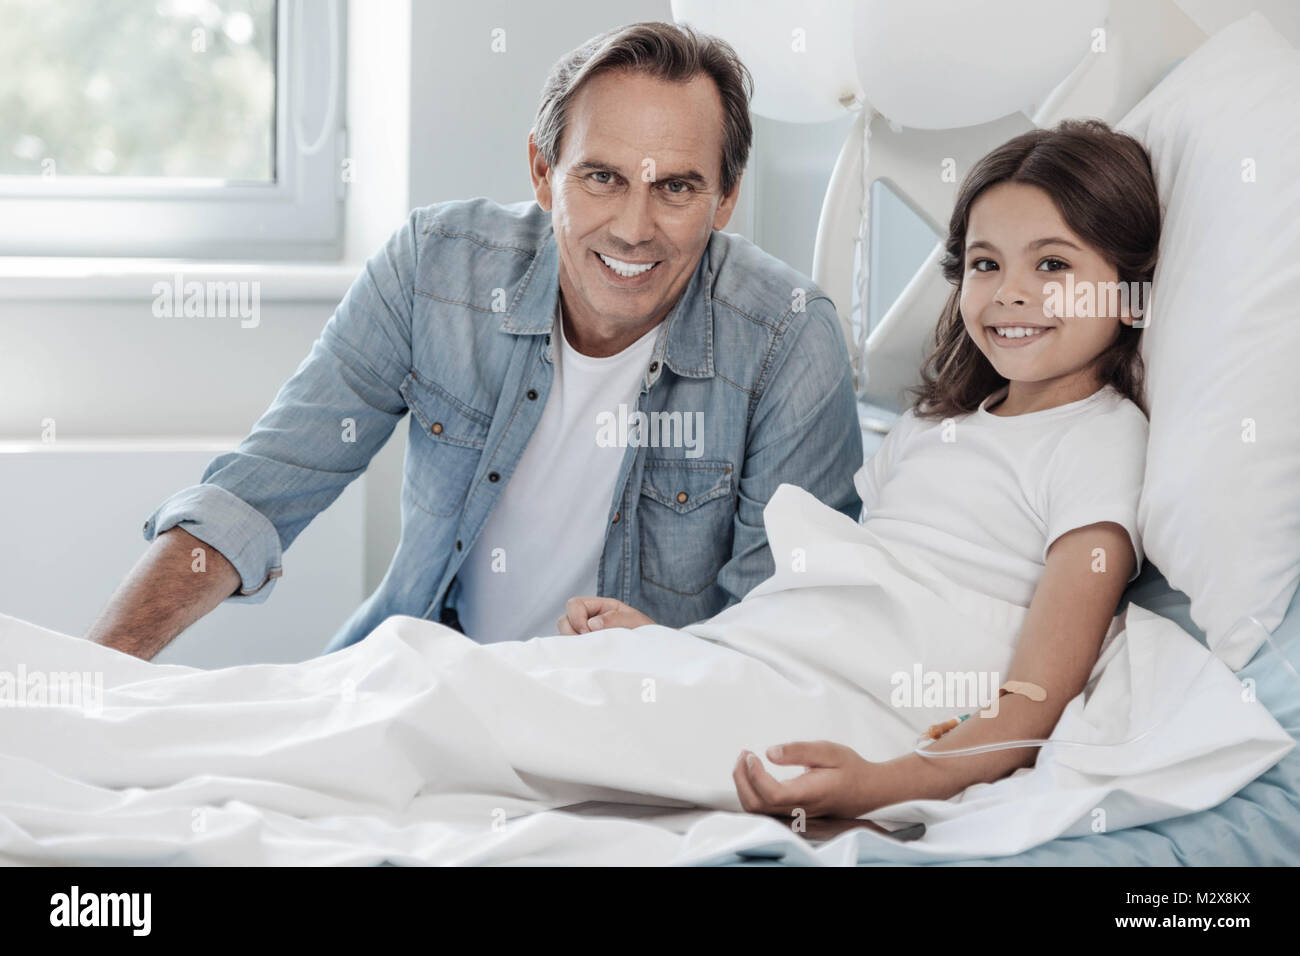 Loving father sitting next to his adorable daughter in hospital Stock Photo